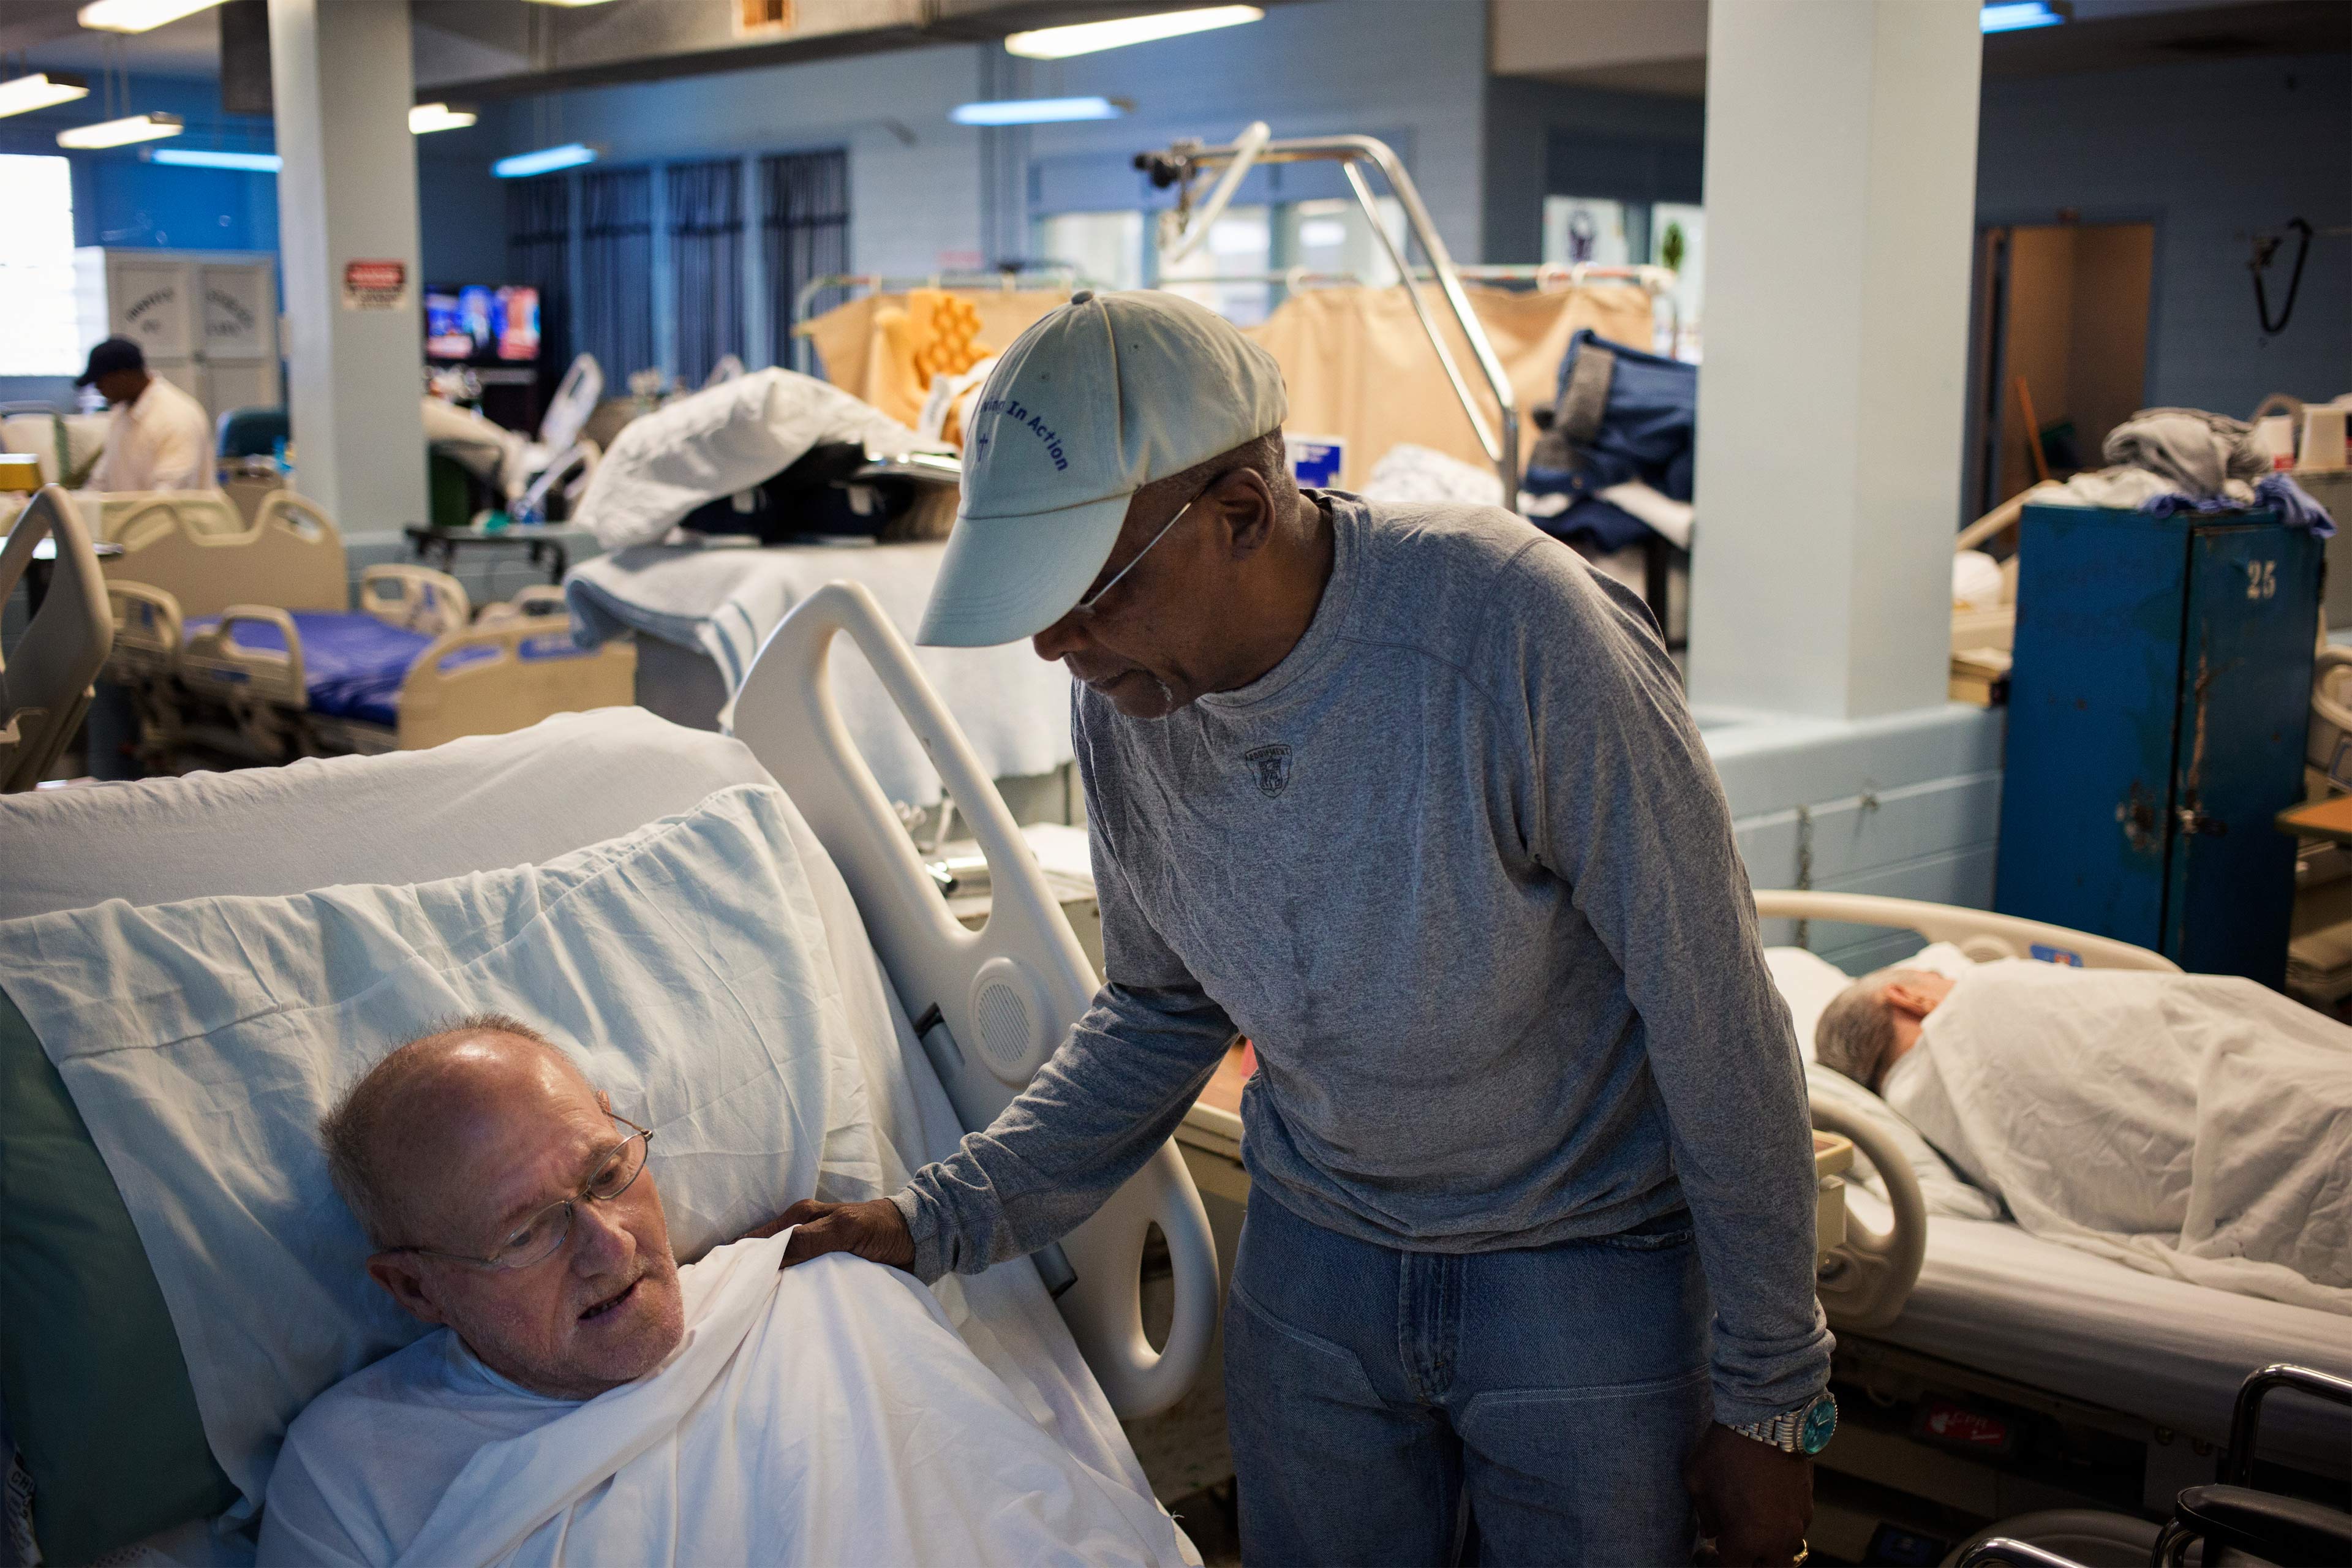 A photo of a younger man wearing touching an older man in a hospital bed on the shoulder.